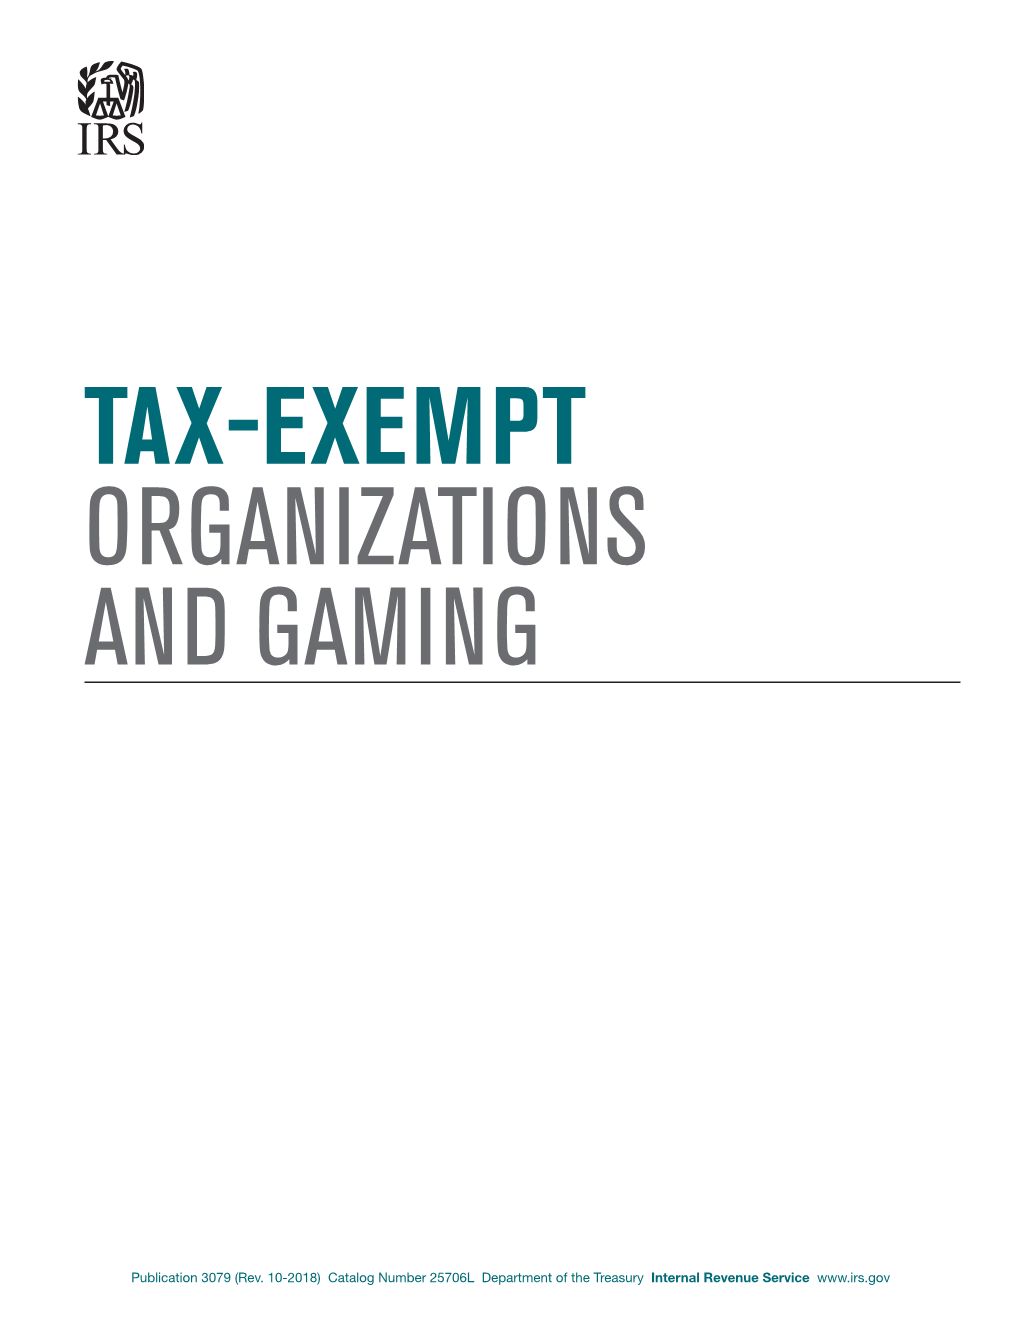 Publication 3079, Tax-Exempt Organizations and Gaming